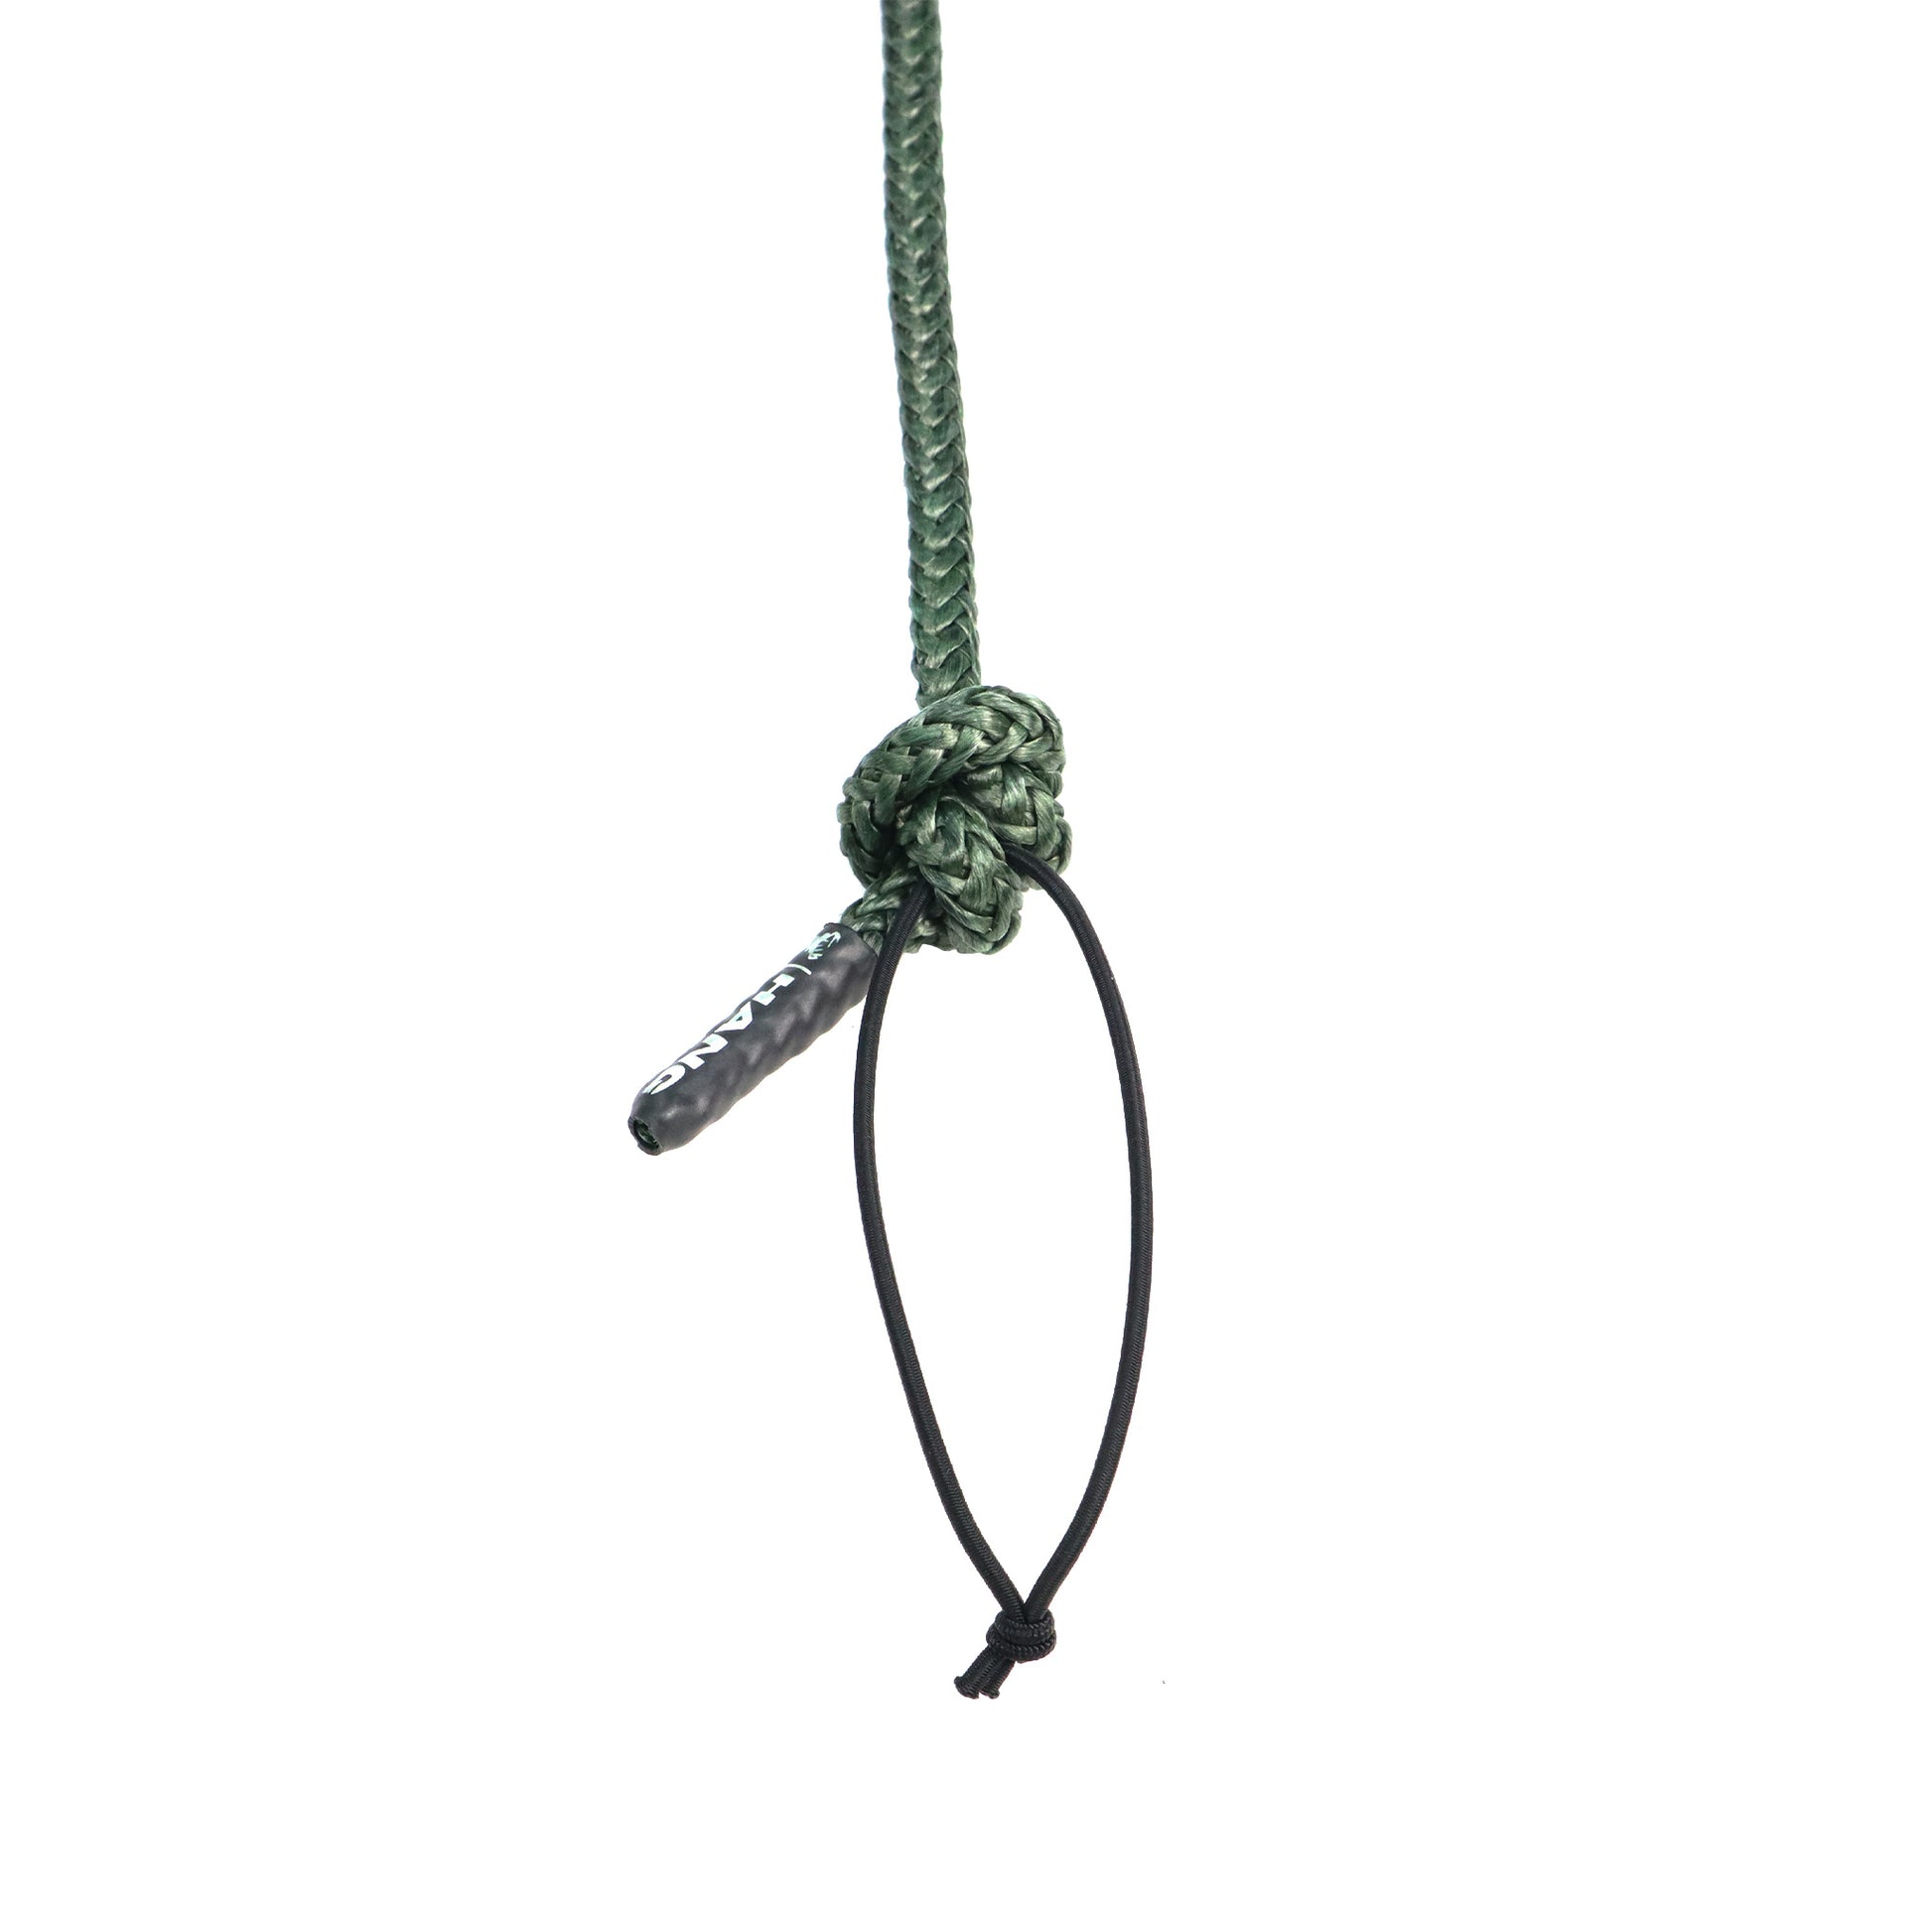 Olive Green 3/16 Hang Free Attachment System (H.F.A.S.) With Bungee